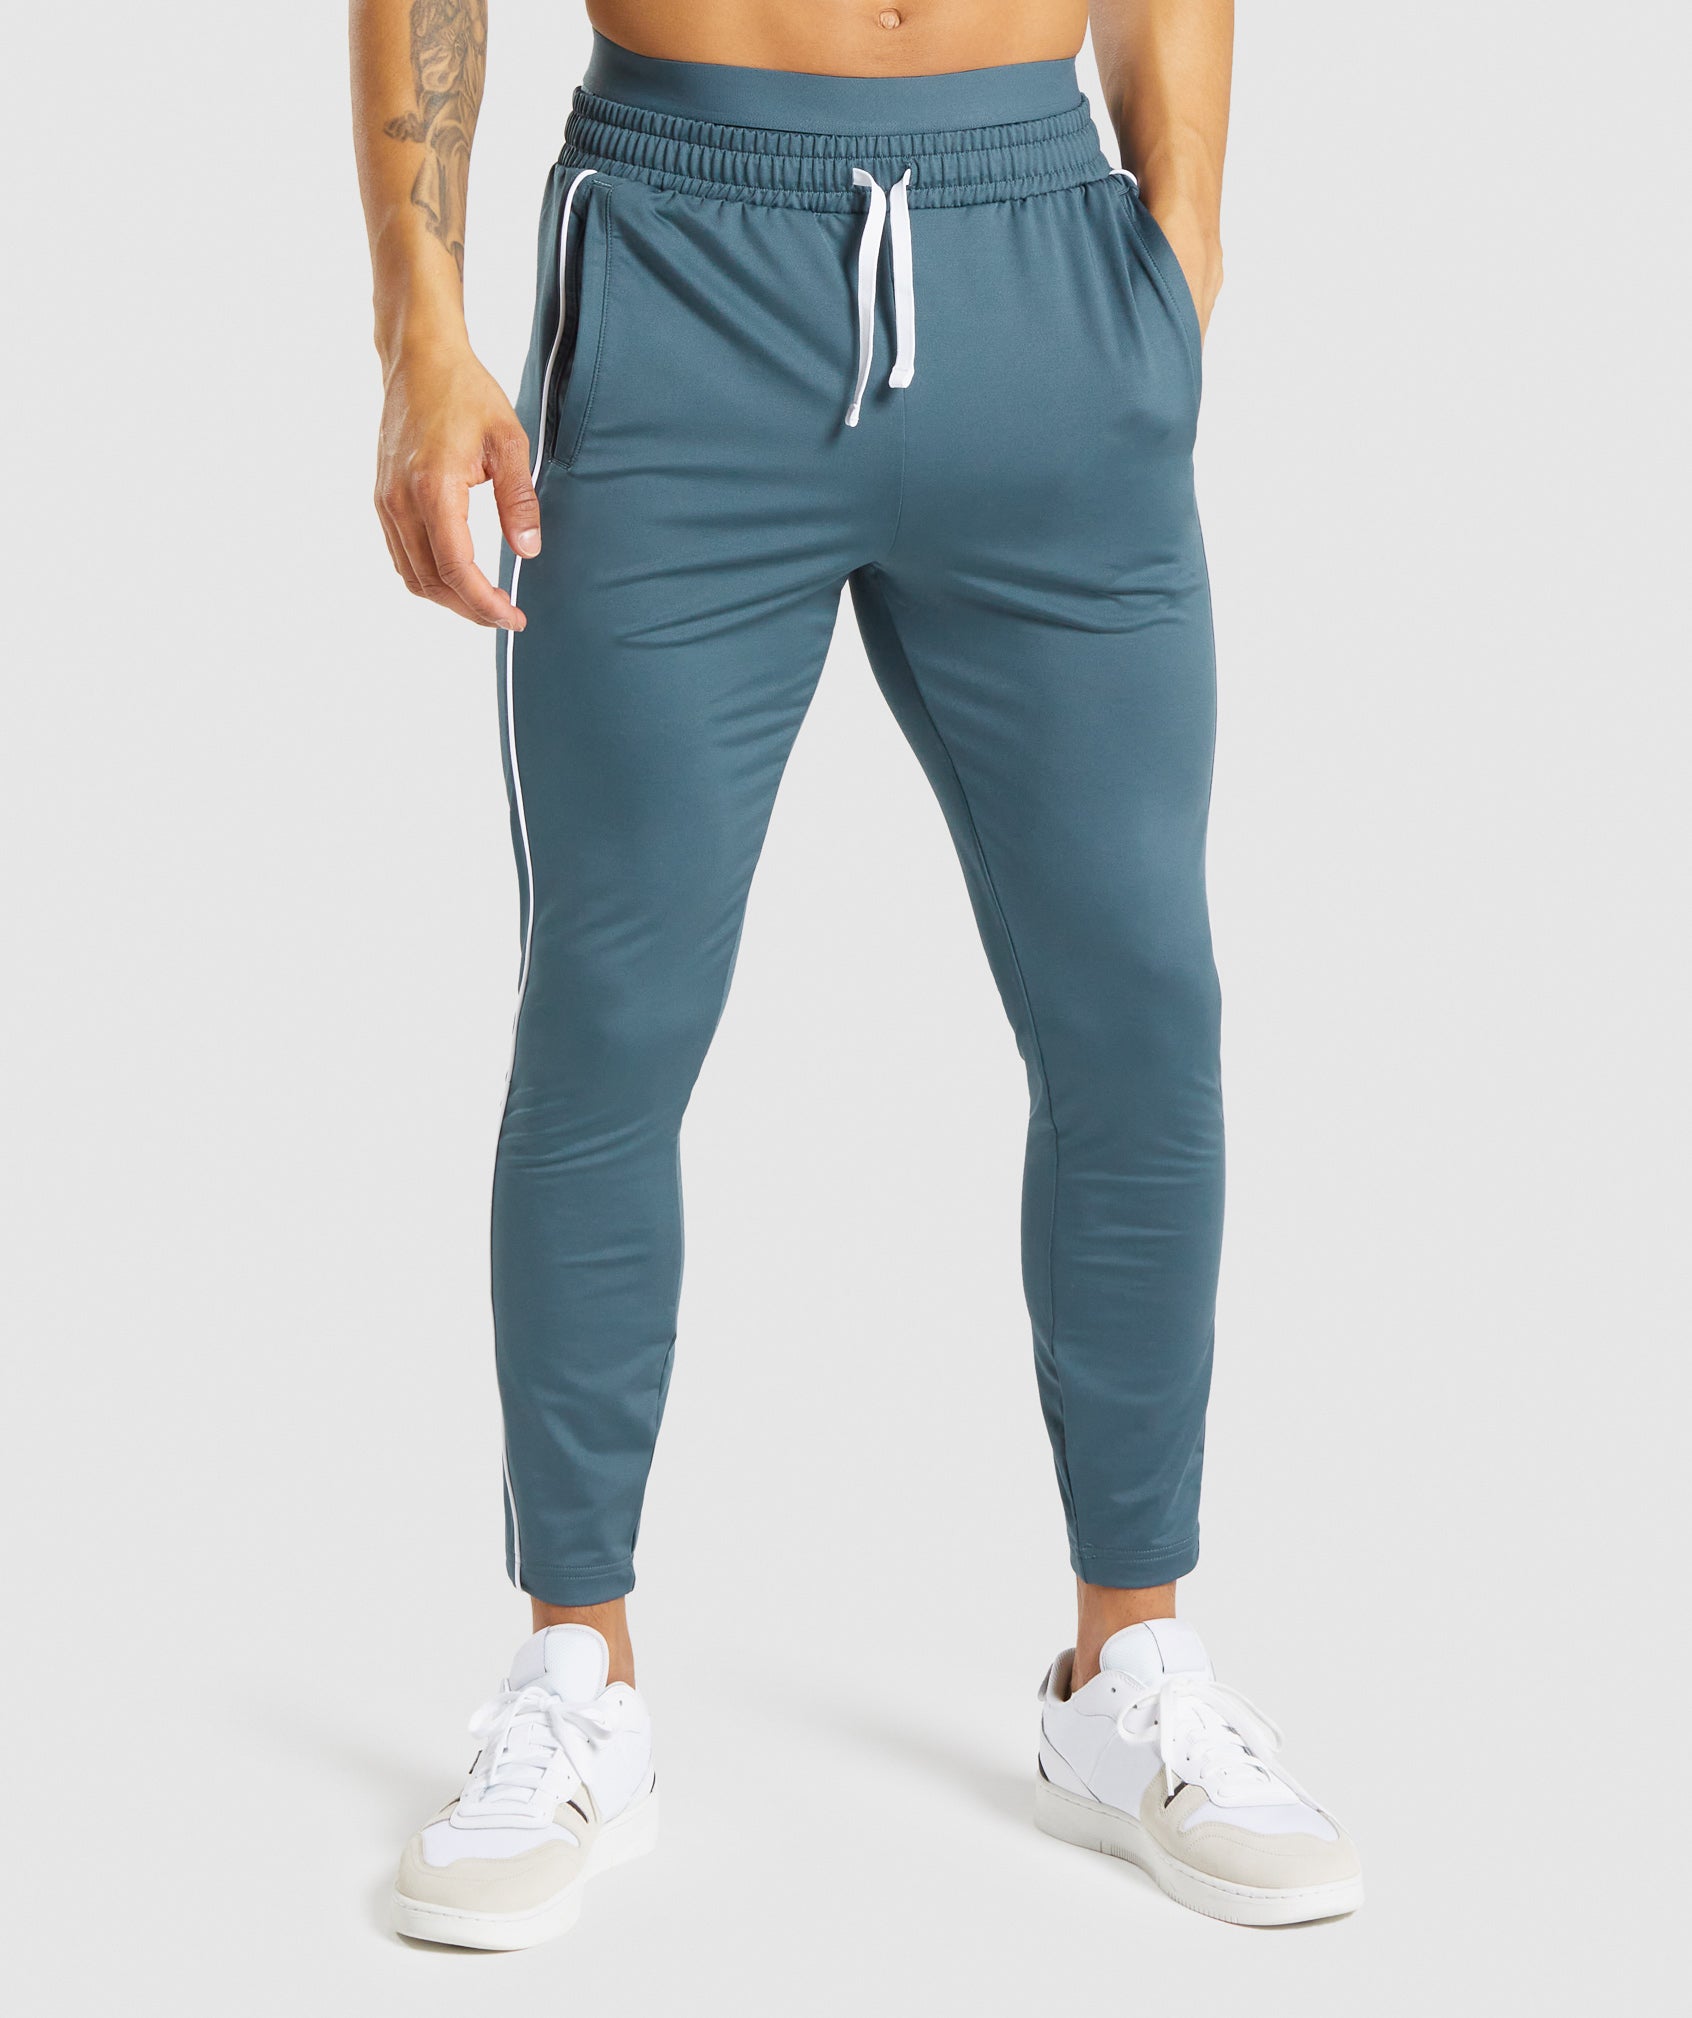 Recess Joggers in Teal - view 1